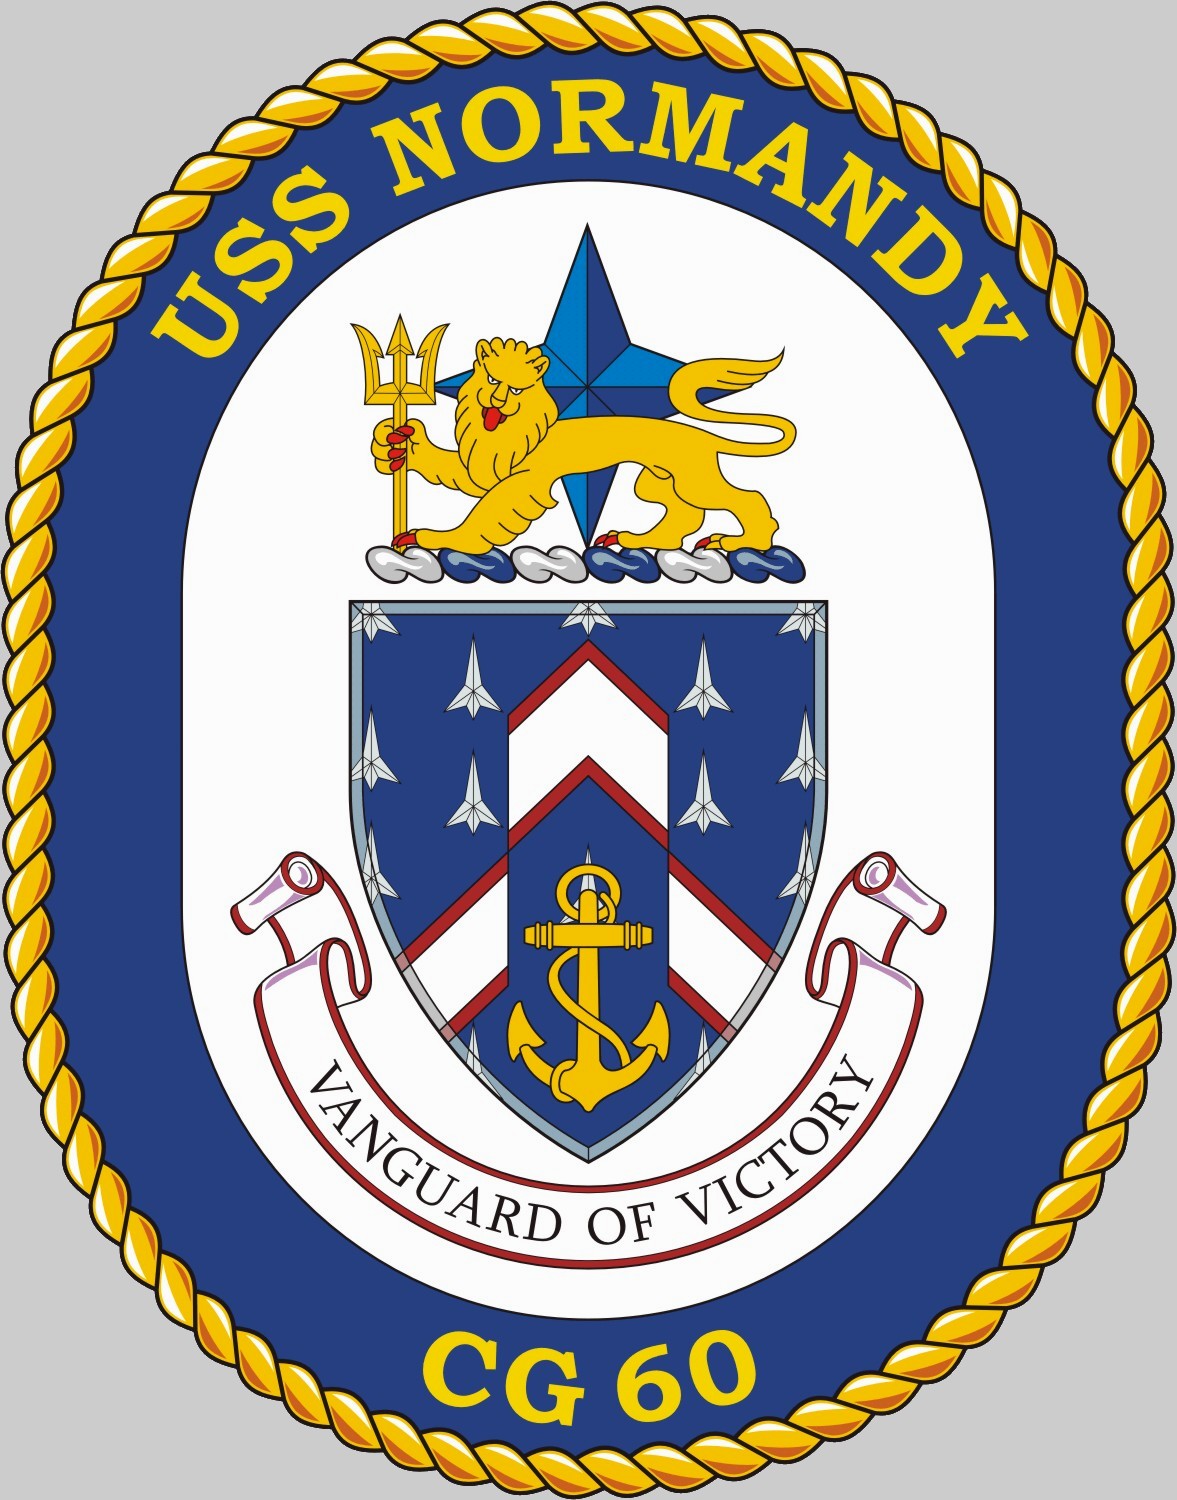 cg-60 uss normandy insignia crest patch badge ticonderoga class guided missile cruiser aegis us navy 02x